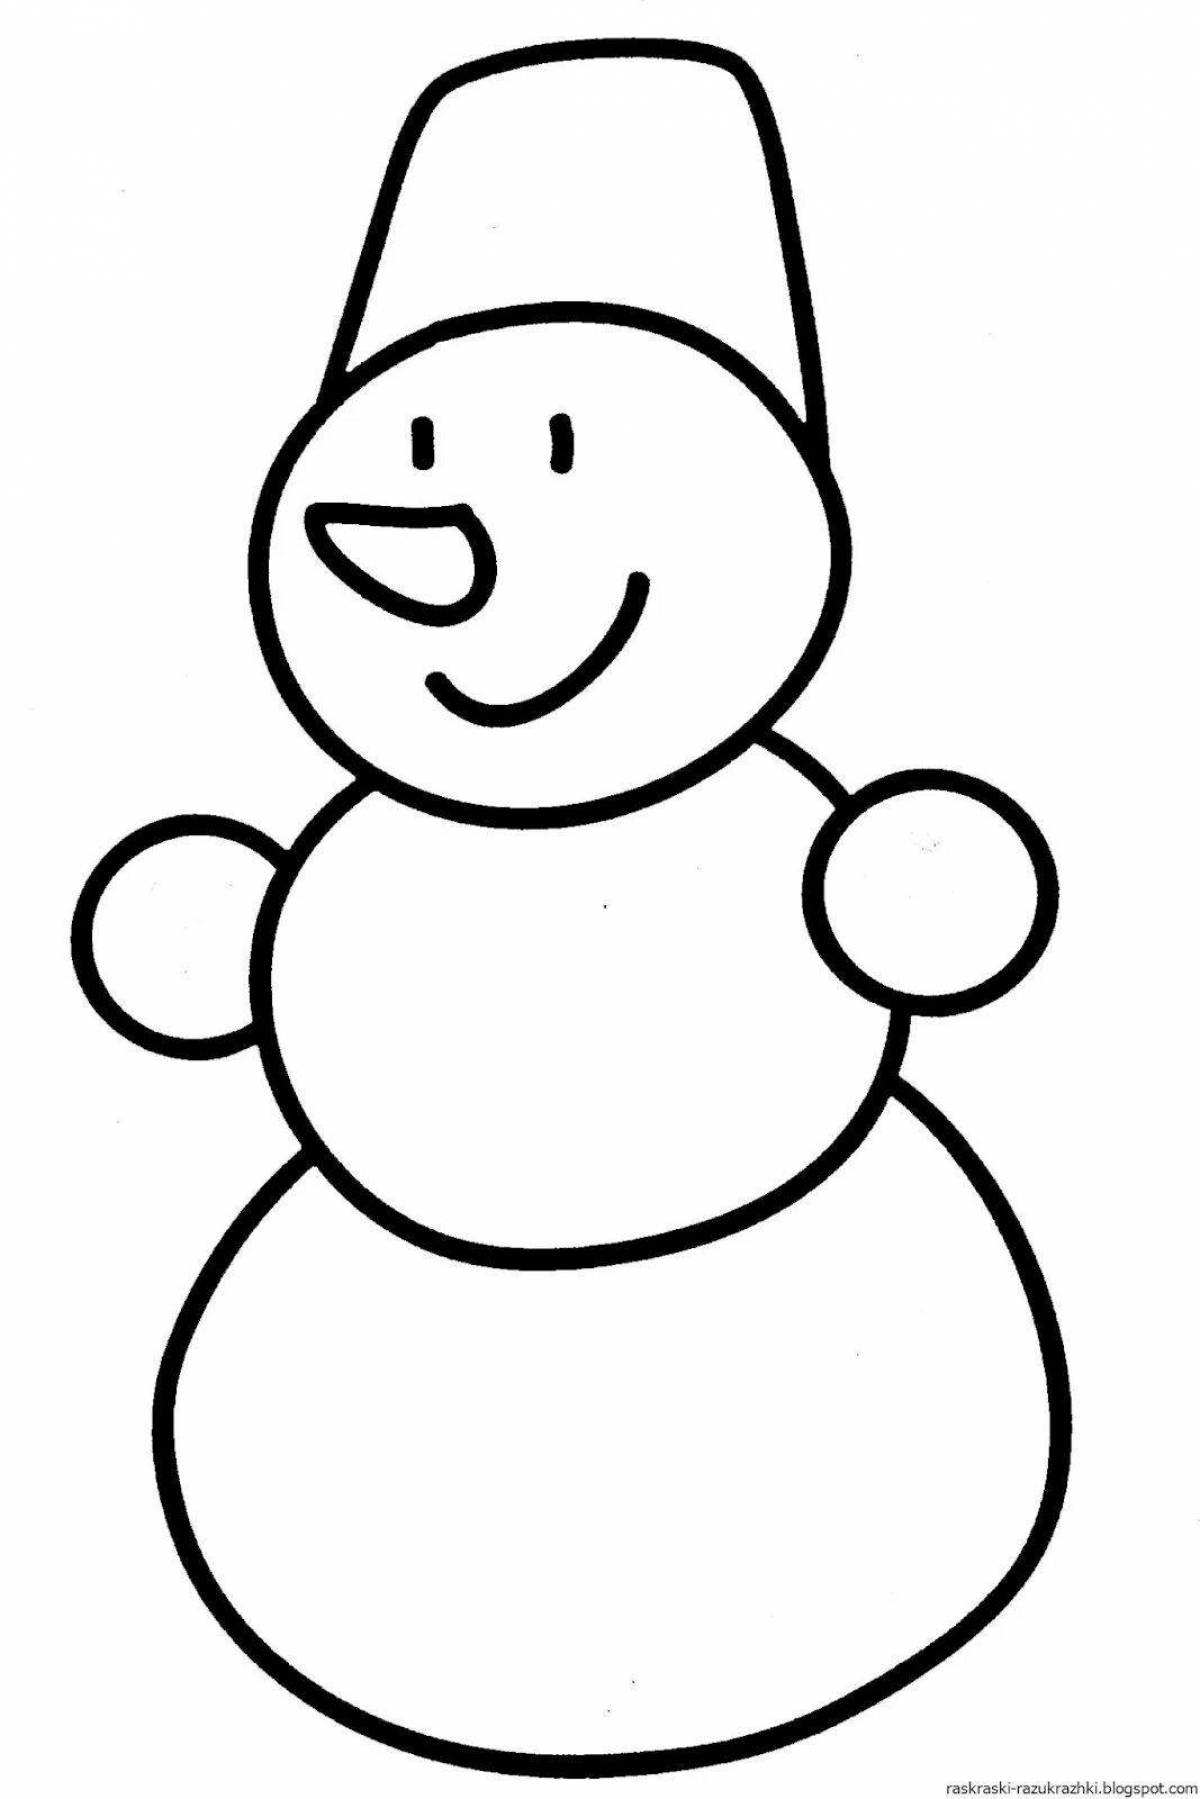 Outstanding snowman coloring book for 5 year olds